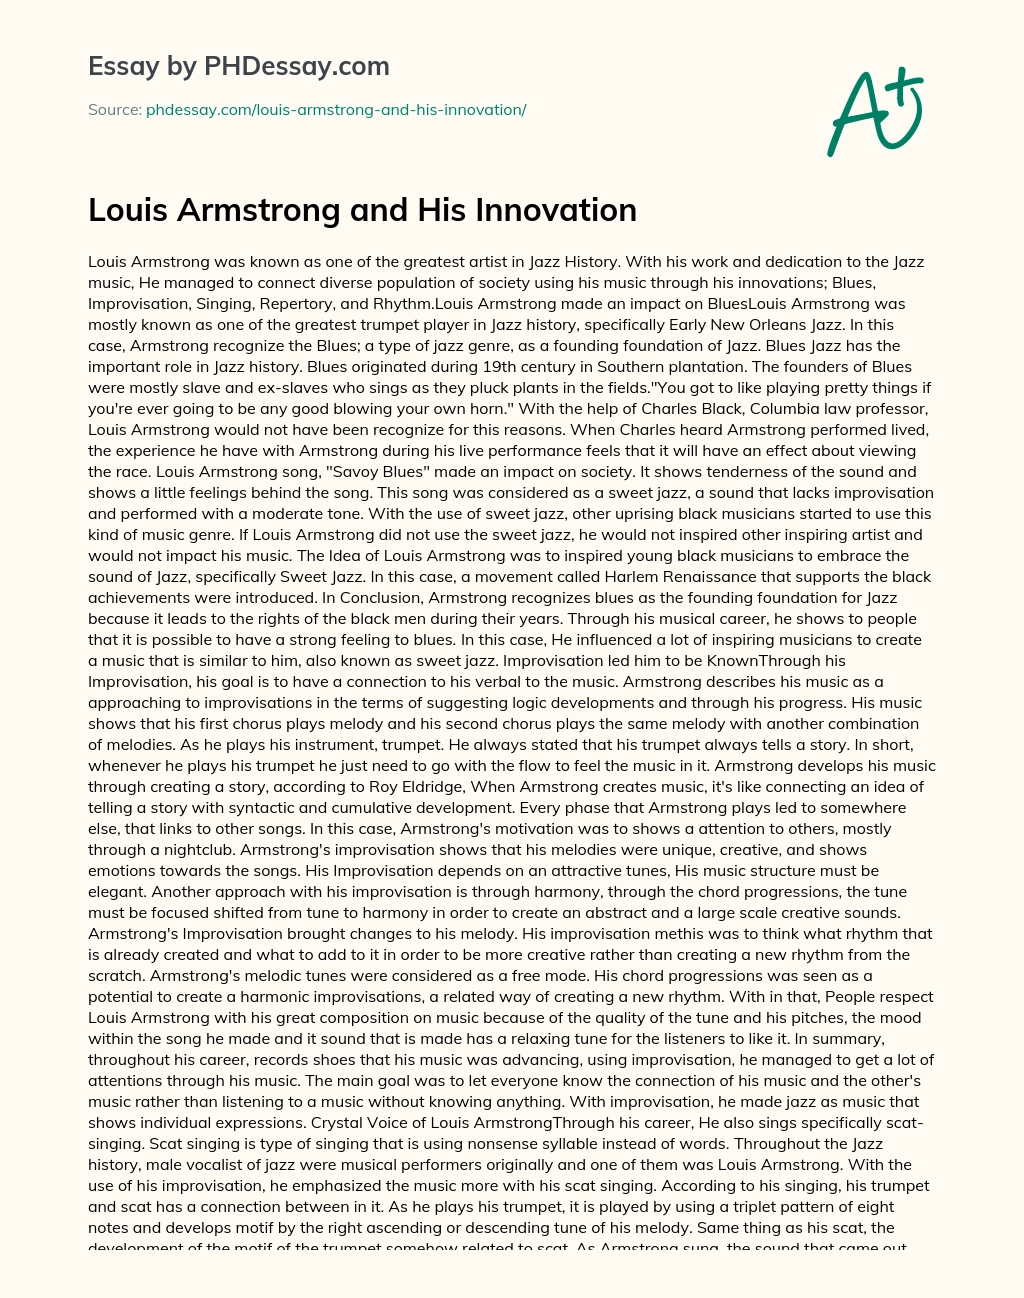 Louis Armstrong and His Innovation essay